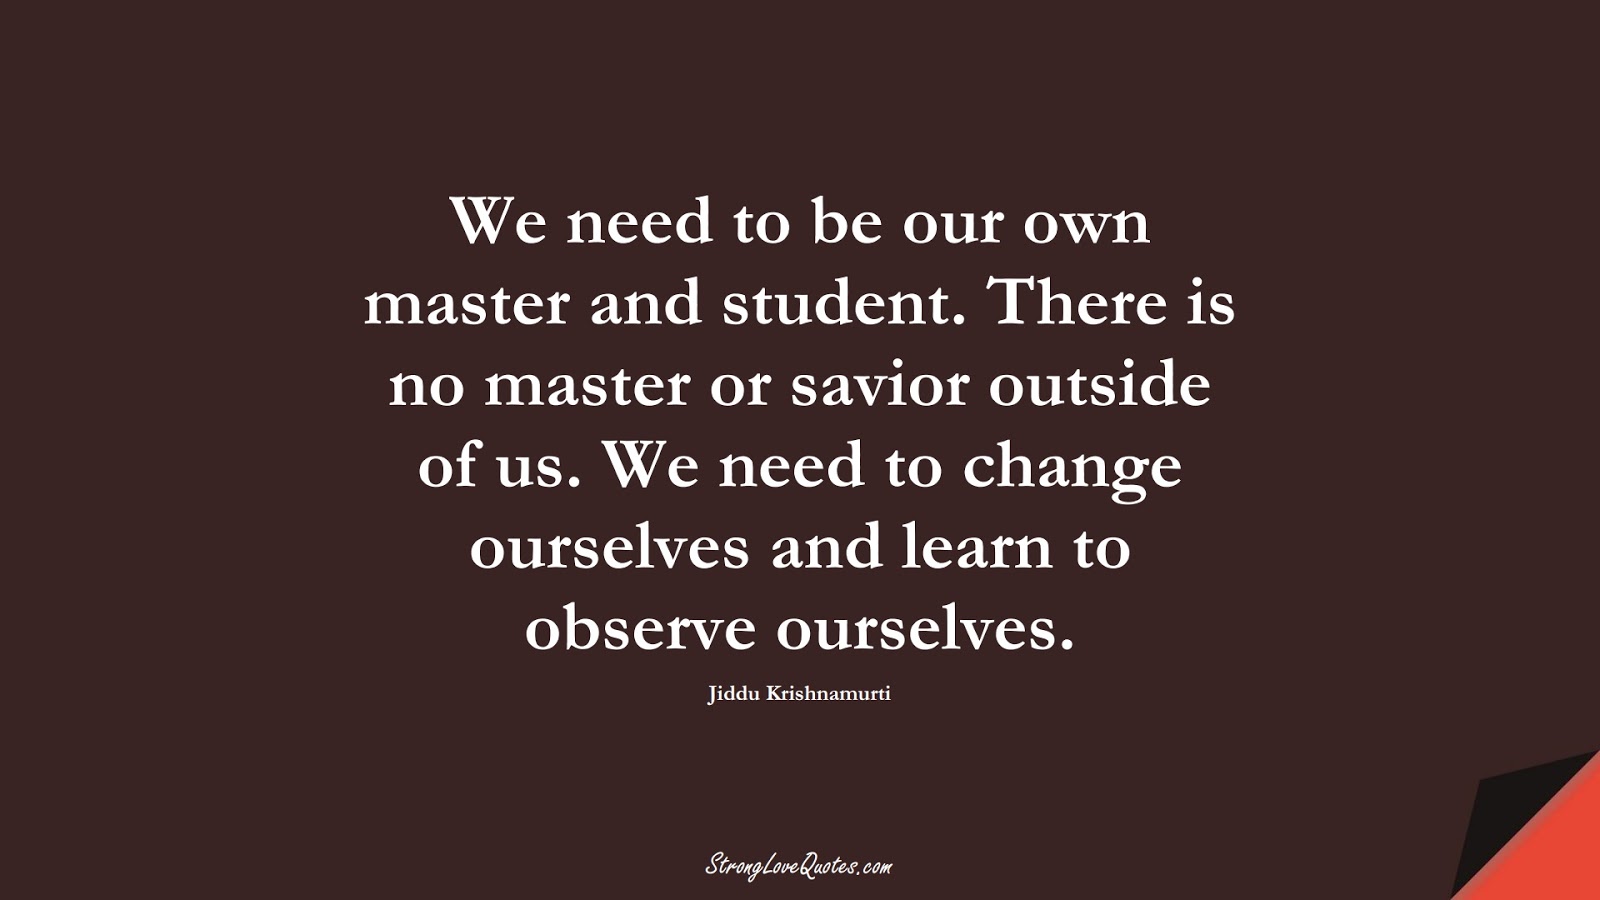 We need to be our own master and student. There is no master or savior outside of us. We need to change ourselves and learn to observe ourselves. (Jiddu Krishnamurti);  #EducationQuotes